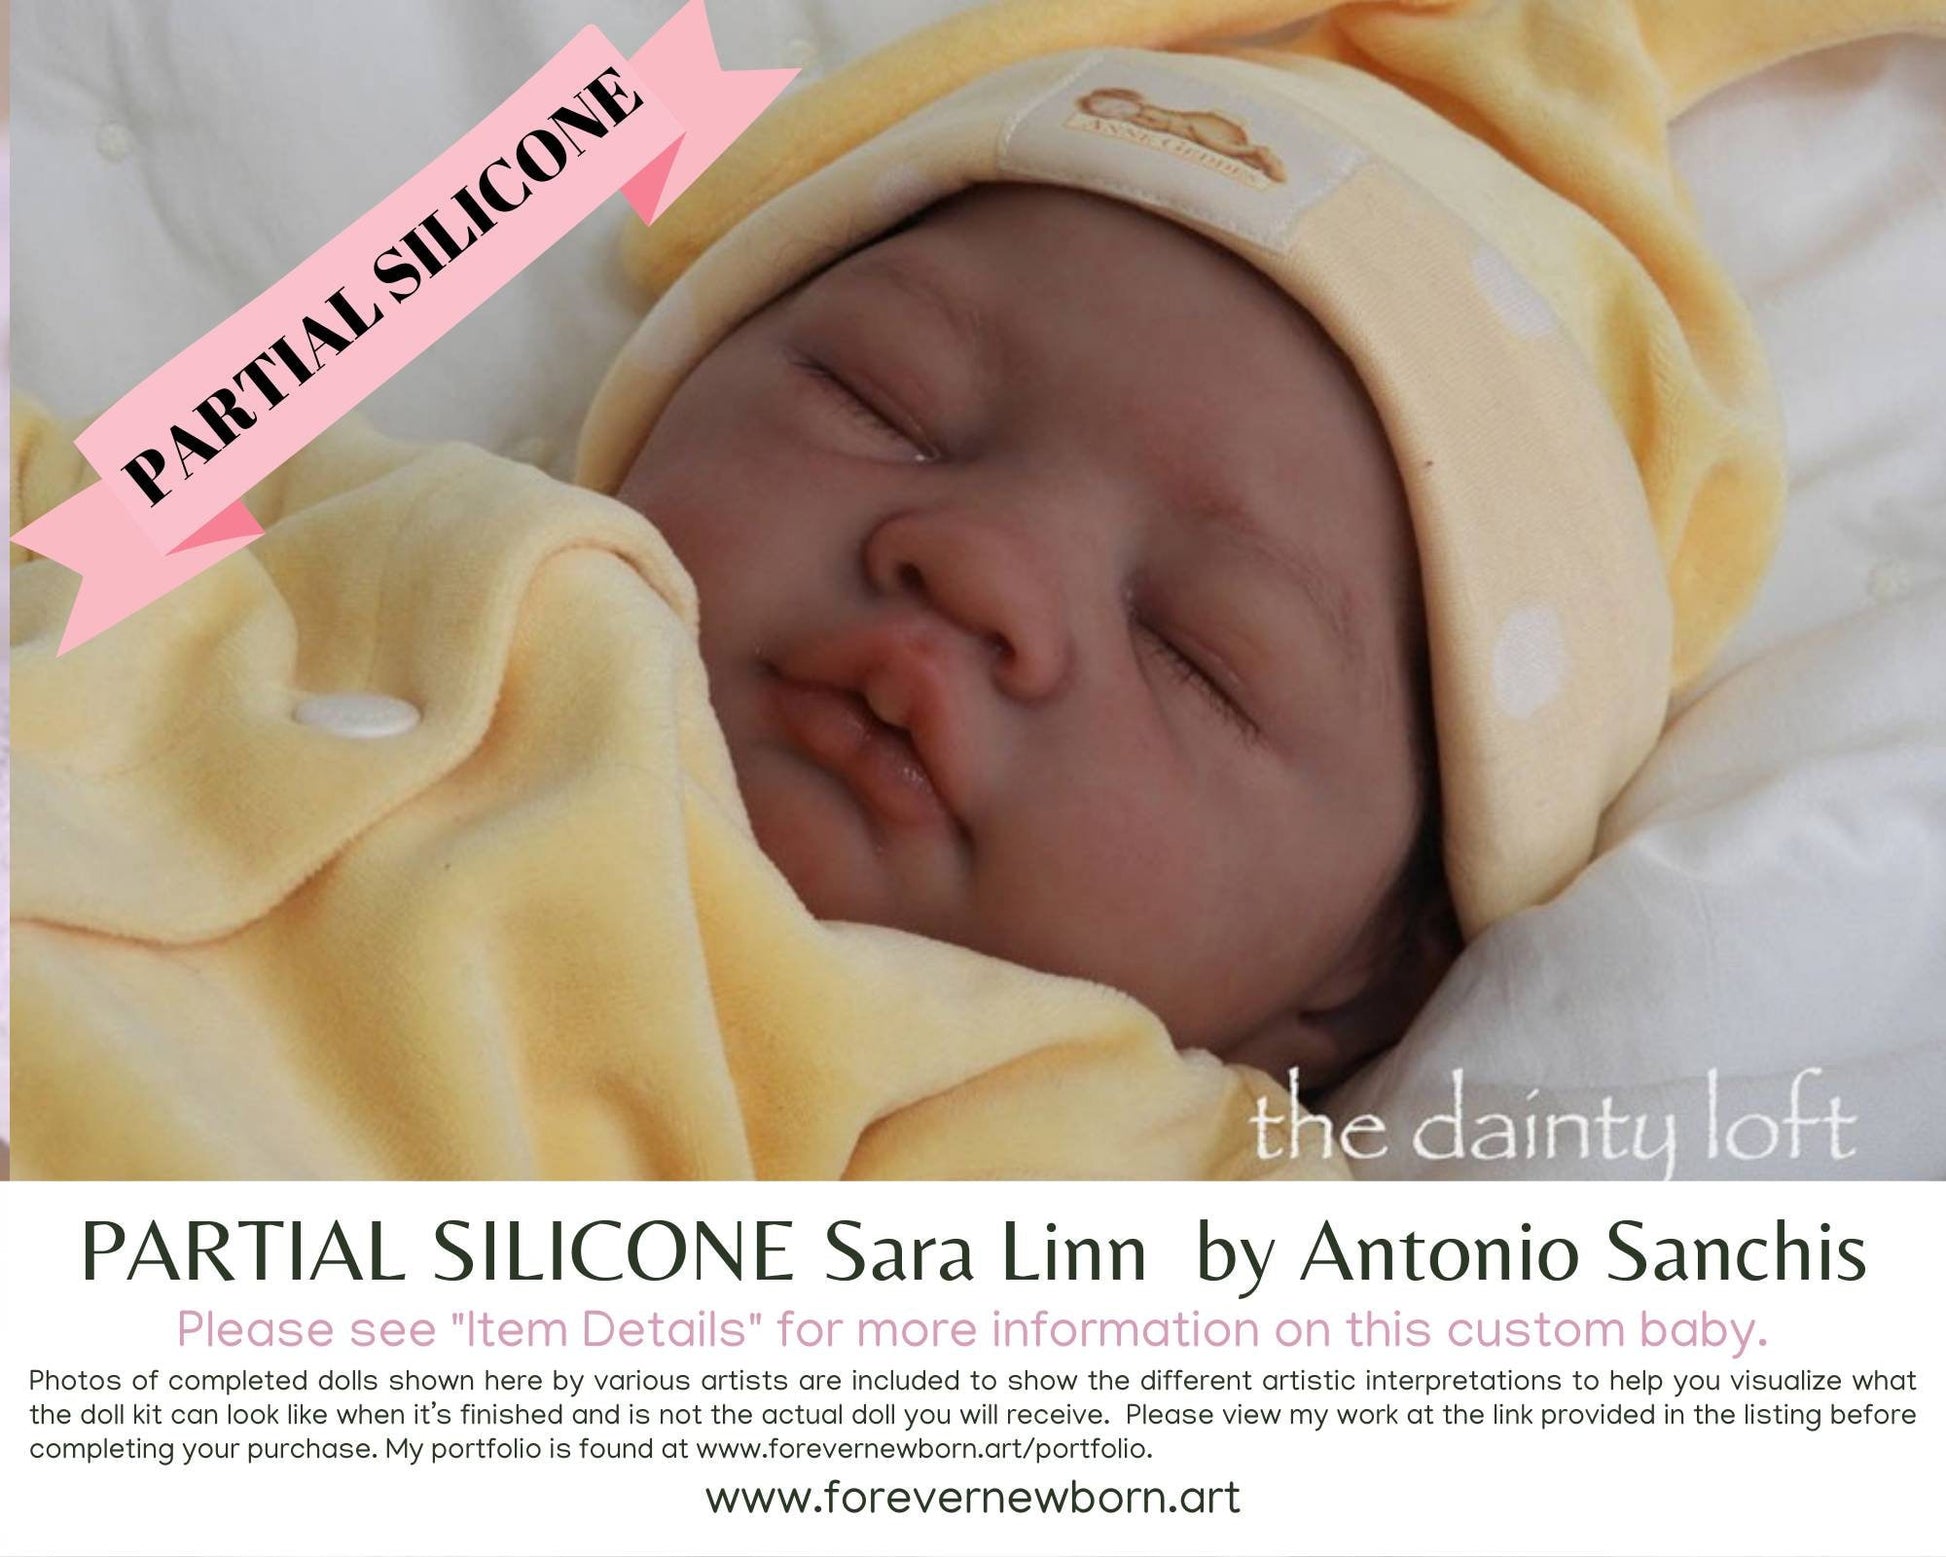 SiLiCoNe BaBy Sara Linn by Antonio Sanchis (21"+ Full Limbs) with cloth body. Extended Processing Time May Be Required. ASK FIRST!